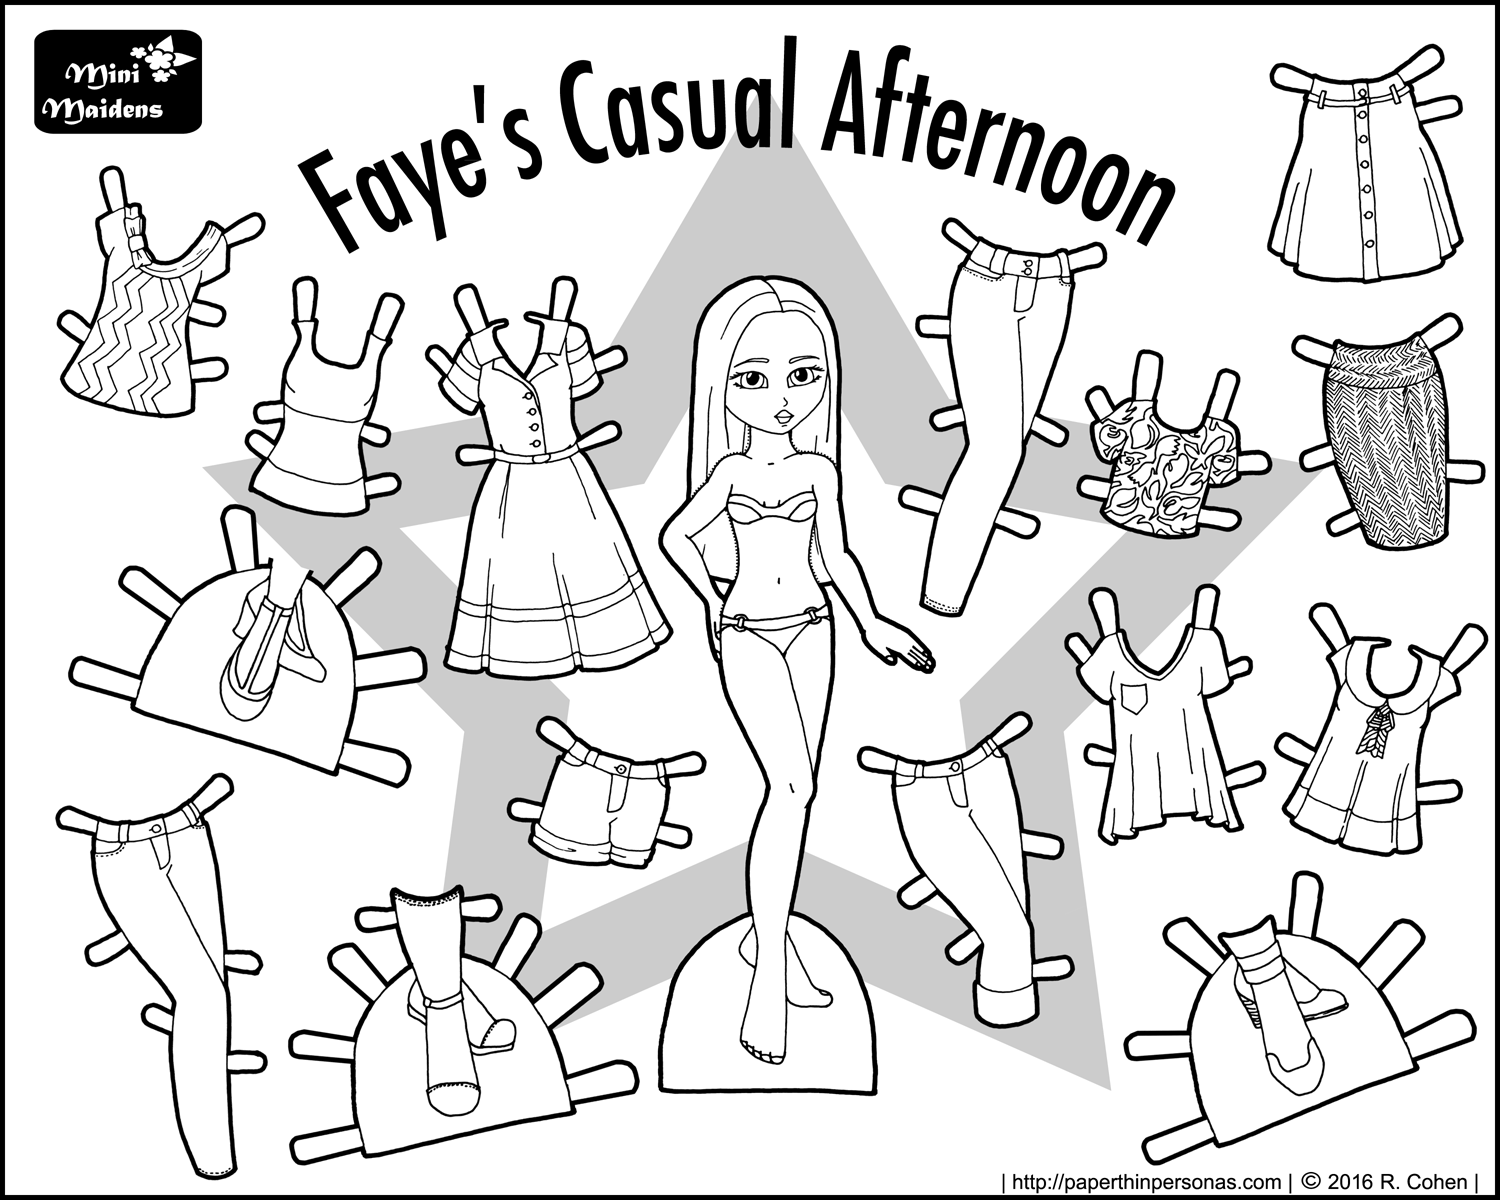 Fayes casual afternoon paper doll coloring sheet